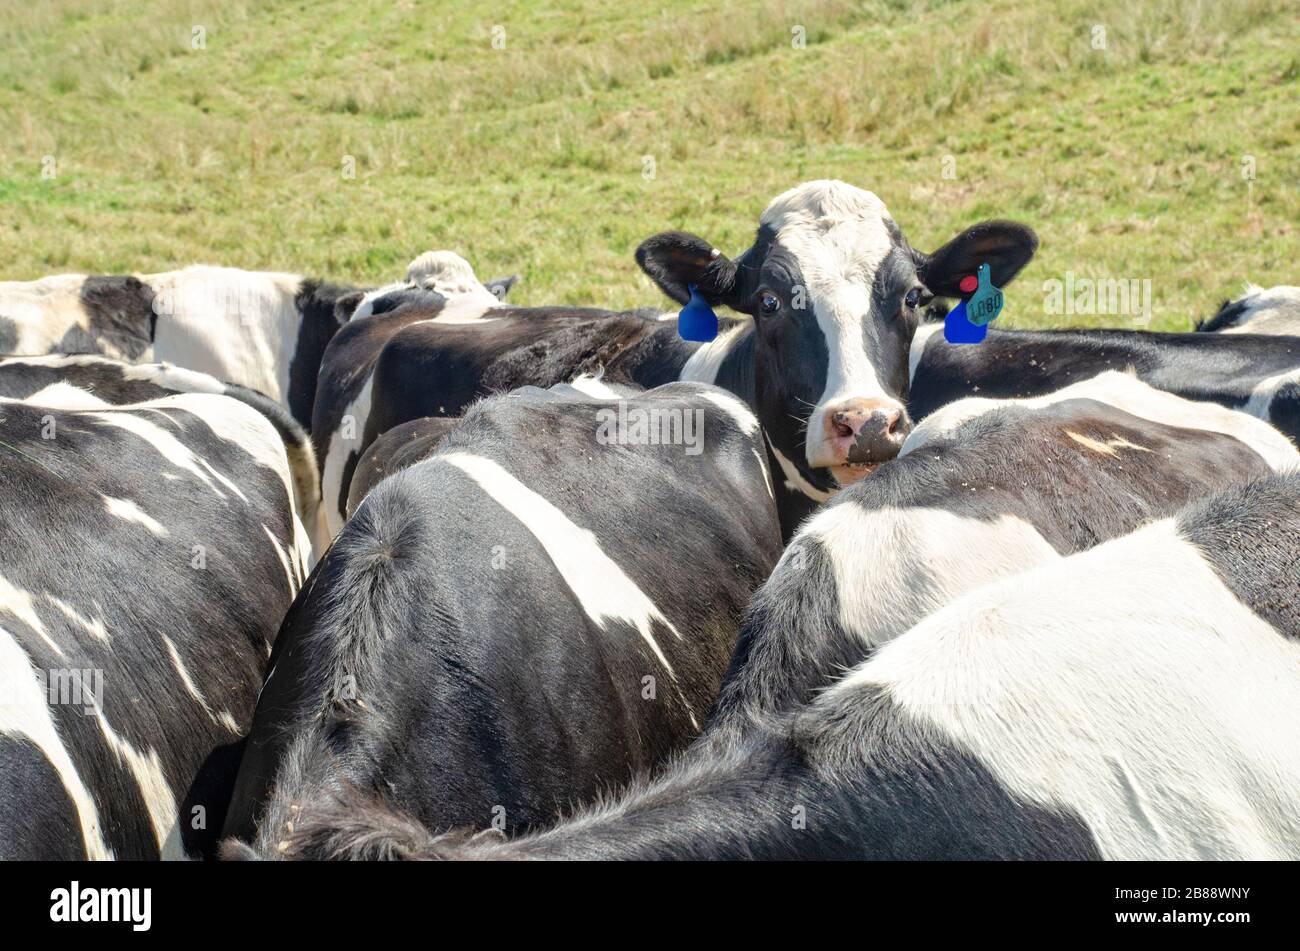 A herd of cows standing in a field together Stock Photo